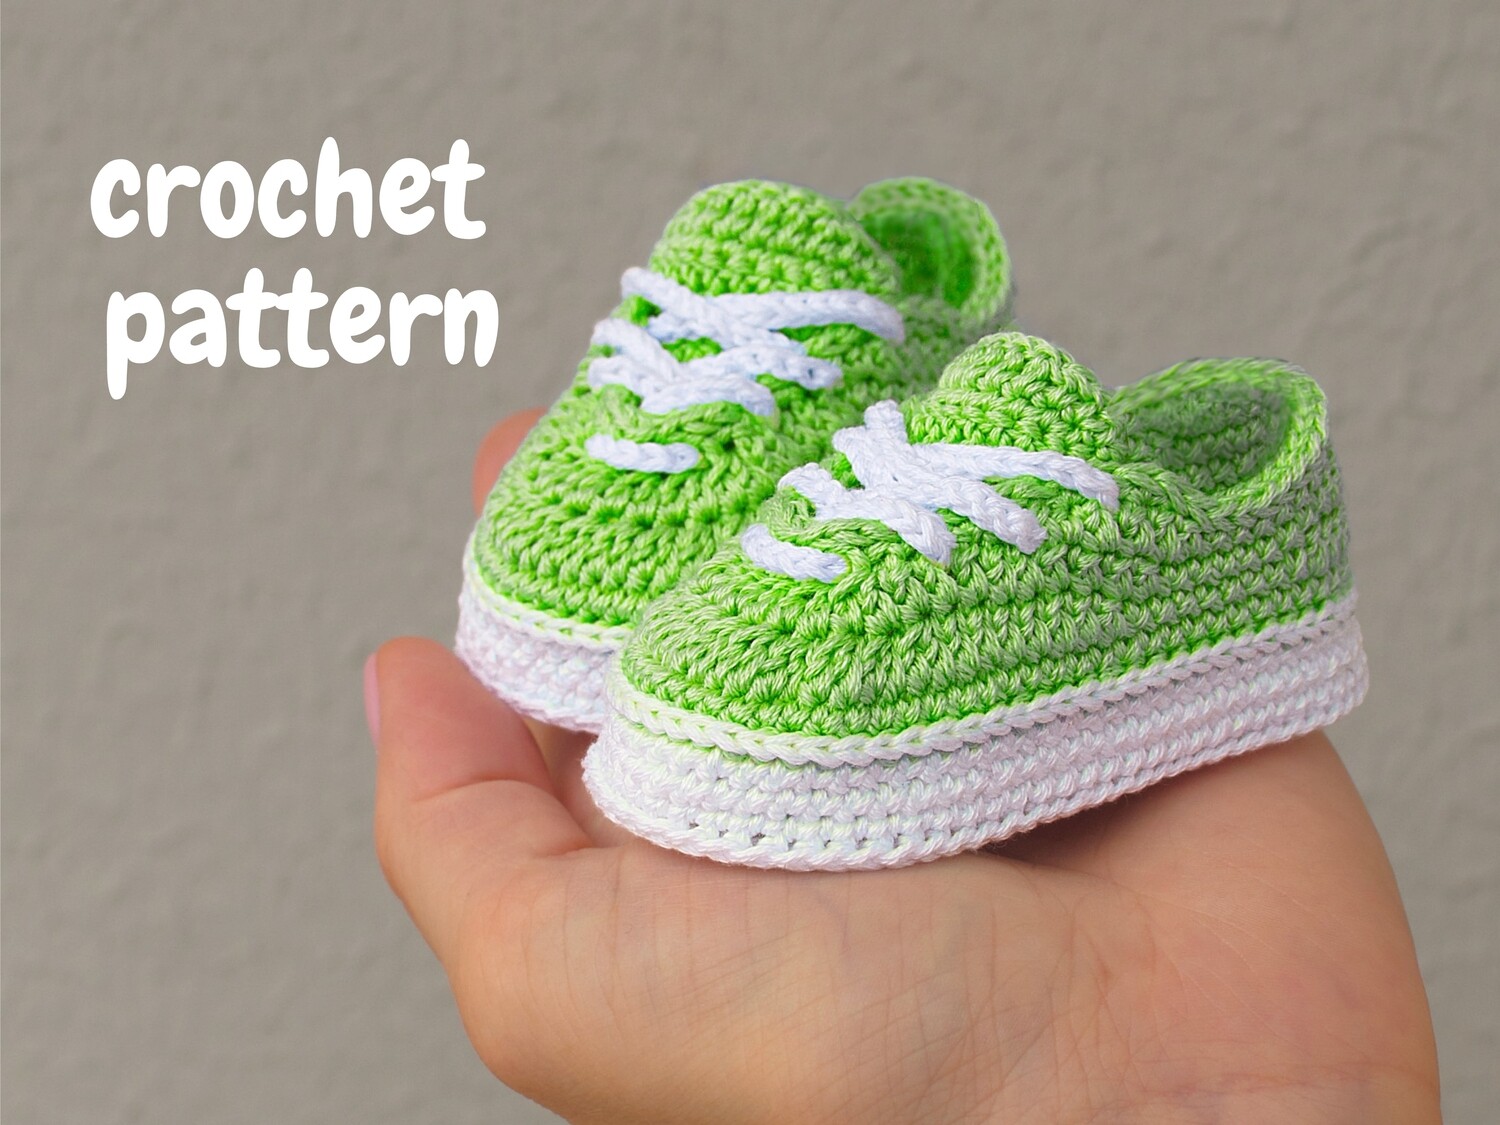 Crochet pattern baby shoes, baby girl boy booties 4 sizes, baby shower gift sneakers, pregnancy gift idea, DIY newborn baby clothes